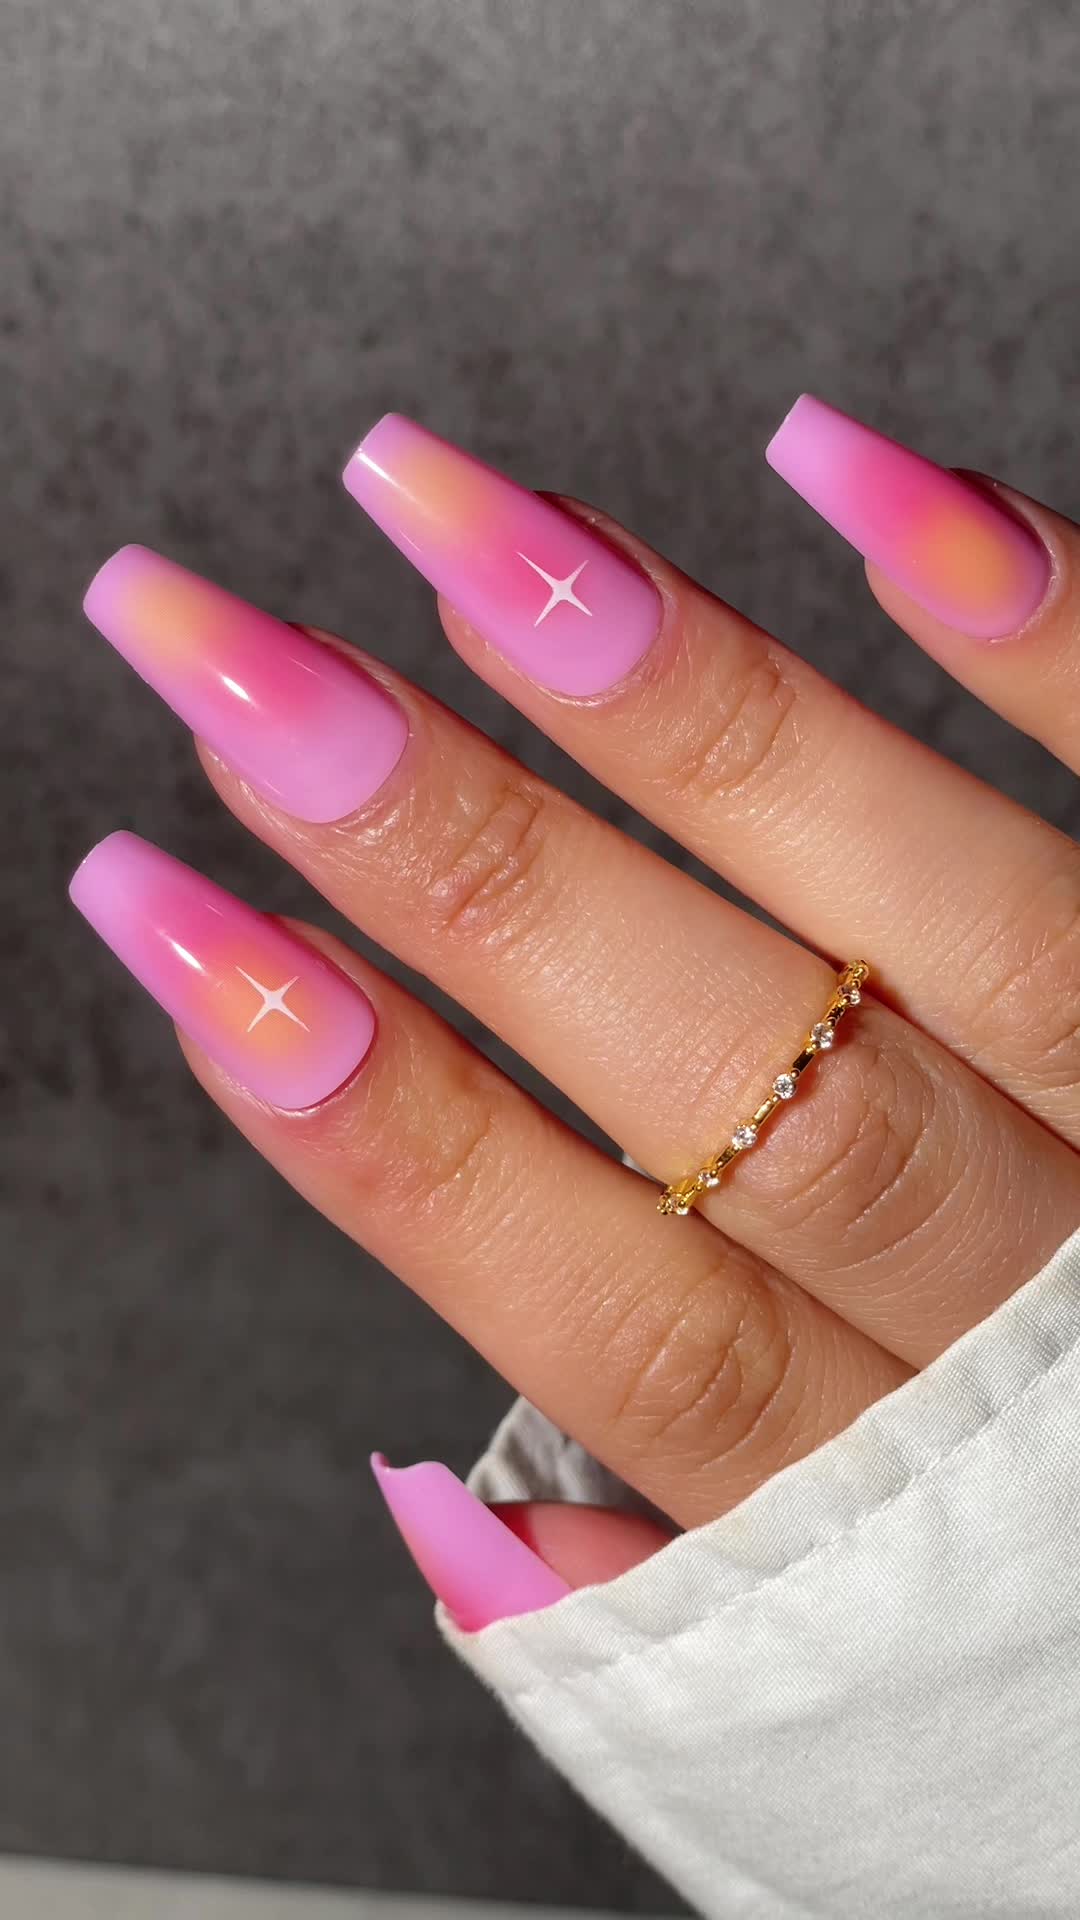 Journey to Find the Best Press on Nail Glue 💅🏼 | Gallery posted by Kaela  Tripp | Lemon8